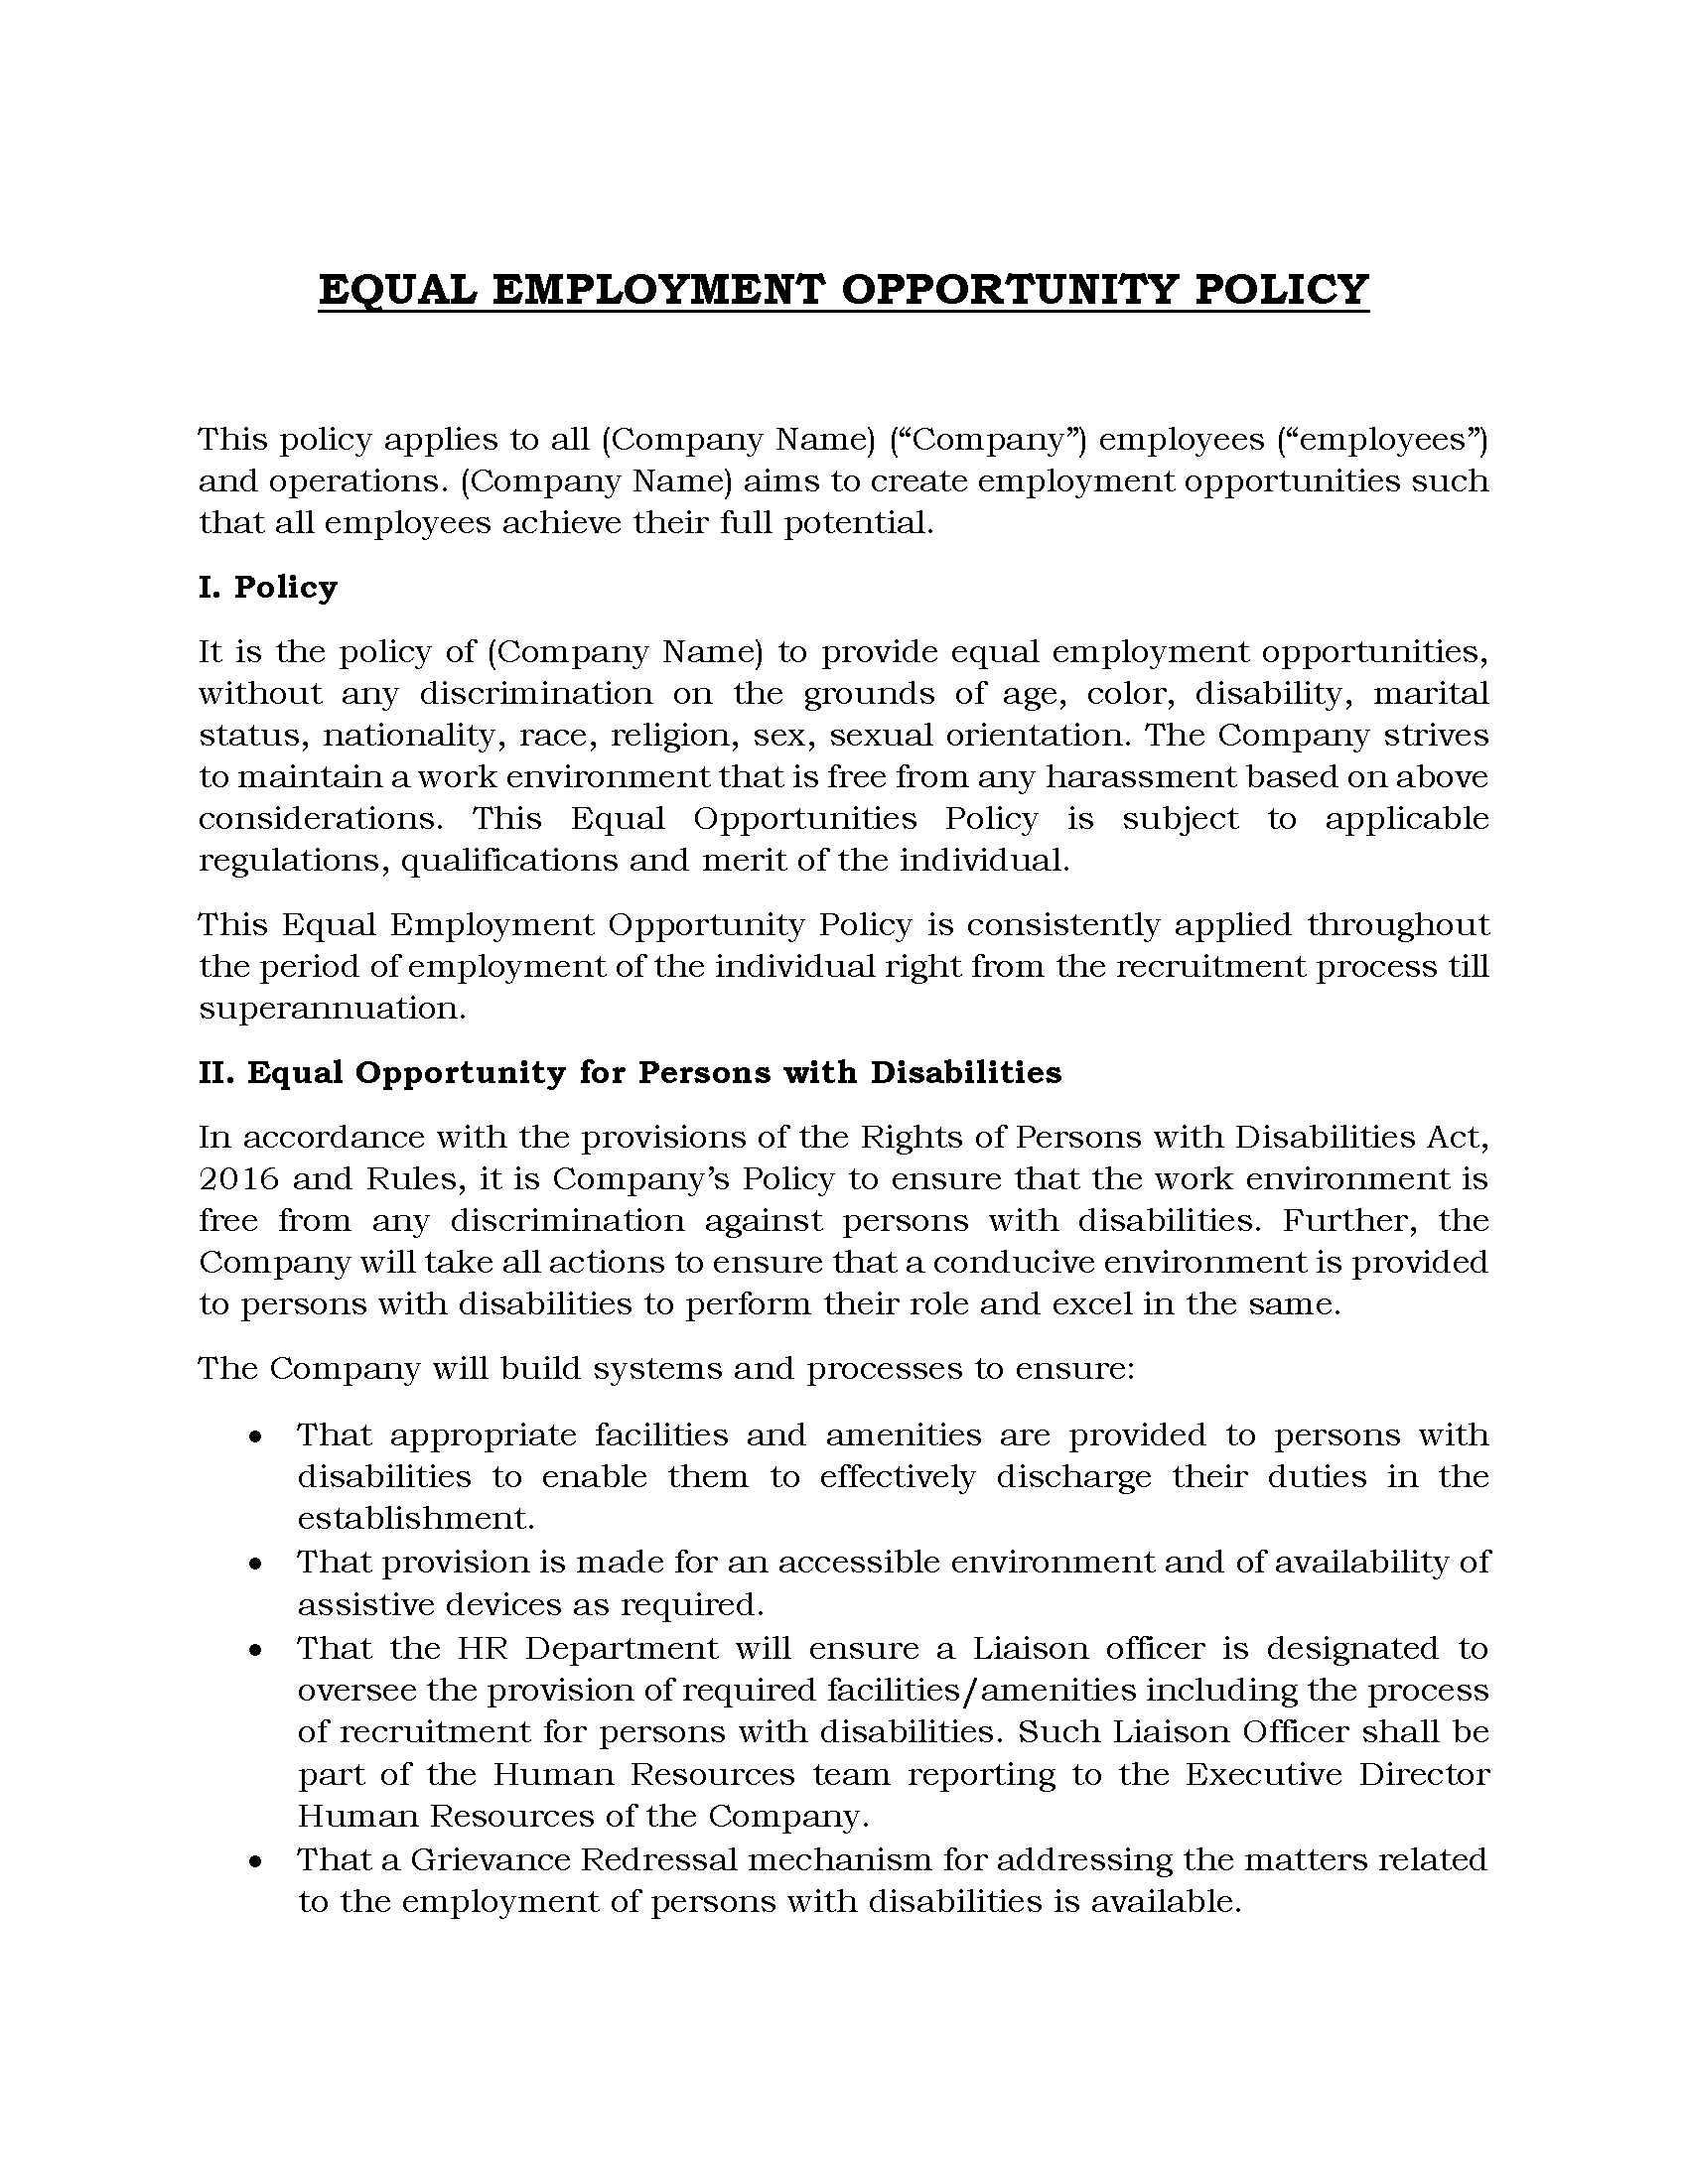 22 - Equal Employment Opportunity Policy